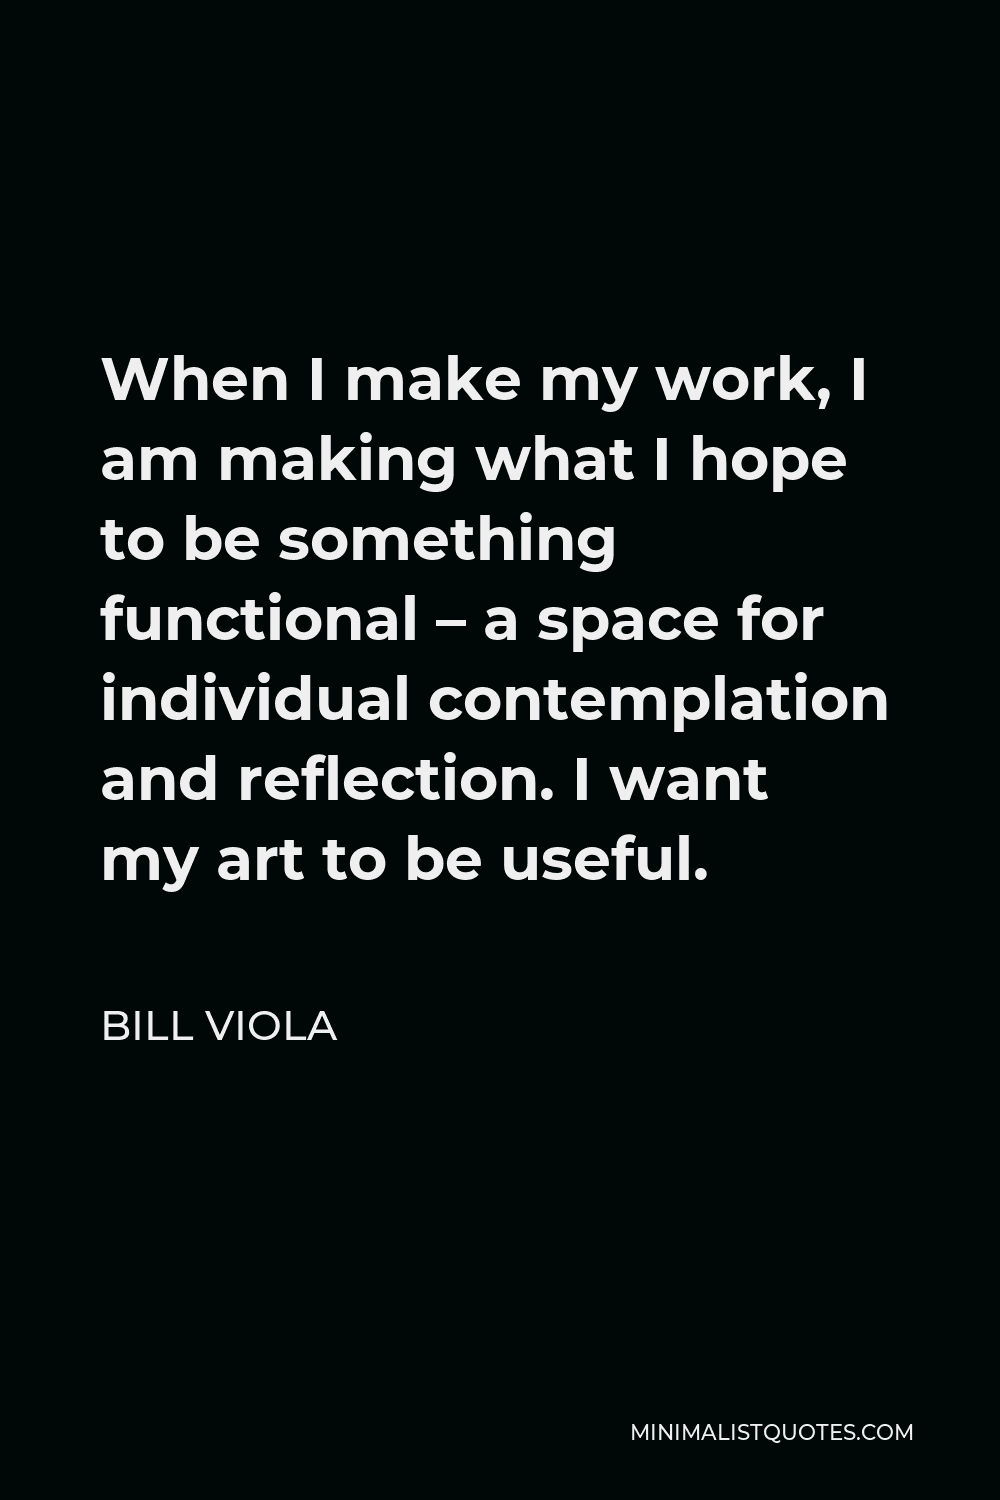 Bill Viola Quote - When I make my work, I am making what I hope to be something functional – a space for individual contemplation and reflection. I want my art to be useful.